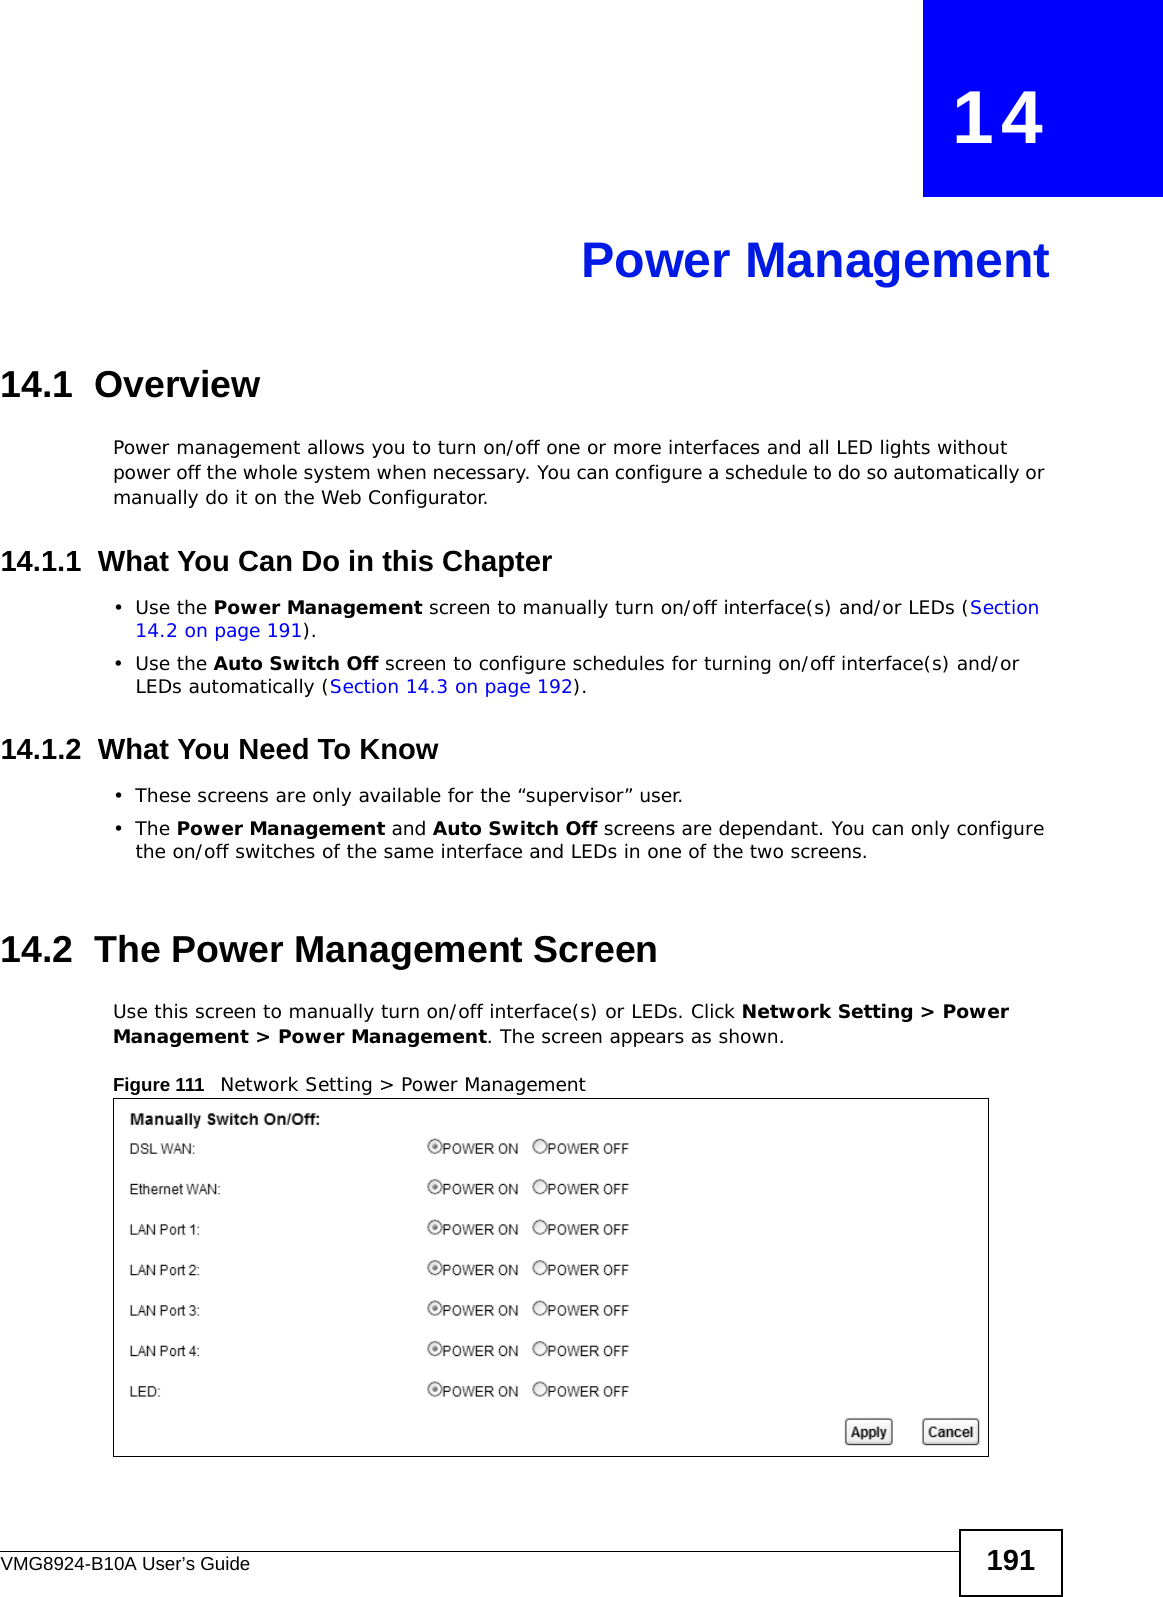 VMG8924-B10A User’s Guide 191CHAPTER   14Power Management14.1  Overview Power management allows you to turn on/off one or more interfaces and all LED lights without power off the whole system when necessary. You can configure a schedule to do so automatically or manually do it on the Web Configurator.14.1.1  What You Can Do in this Chapter•Use the Power Management screen to manually turn on/off interface(s) and/or LEDs (Section 14.2 on page 191). •Use the Auto Switch Off screen to configure schedules for turning on/off interface(s) and/or LEDs automatically (Section 14.3 on page 192).14.1.2  What You Need To Know• These screens are only available for the “supervisor” user.•The Power Management and Auto Switch Off screens are dependant. You can only configure the on/off switches of the same interface and LEDs in one of the two screens.14.2  The Power Management ScreenUse this screen to manually turn on/off interface(s) or LEDs. Click Network Setting &gt; Power Management &gt; Power Management. The screen appears as shown.Figure 111   Network Setting &gt; Power Management